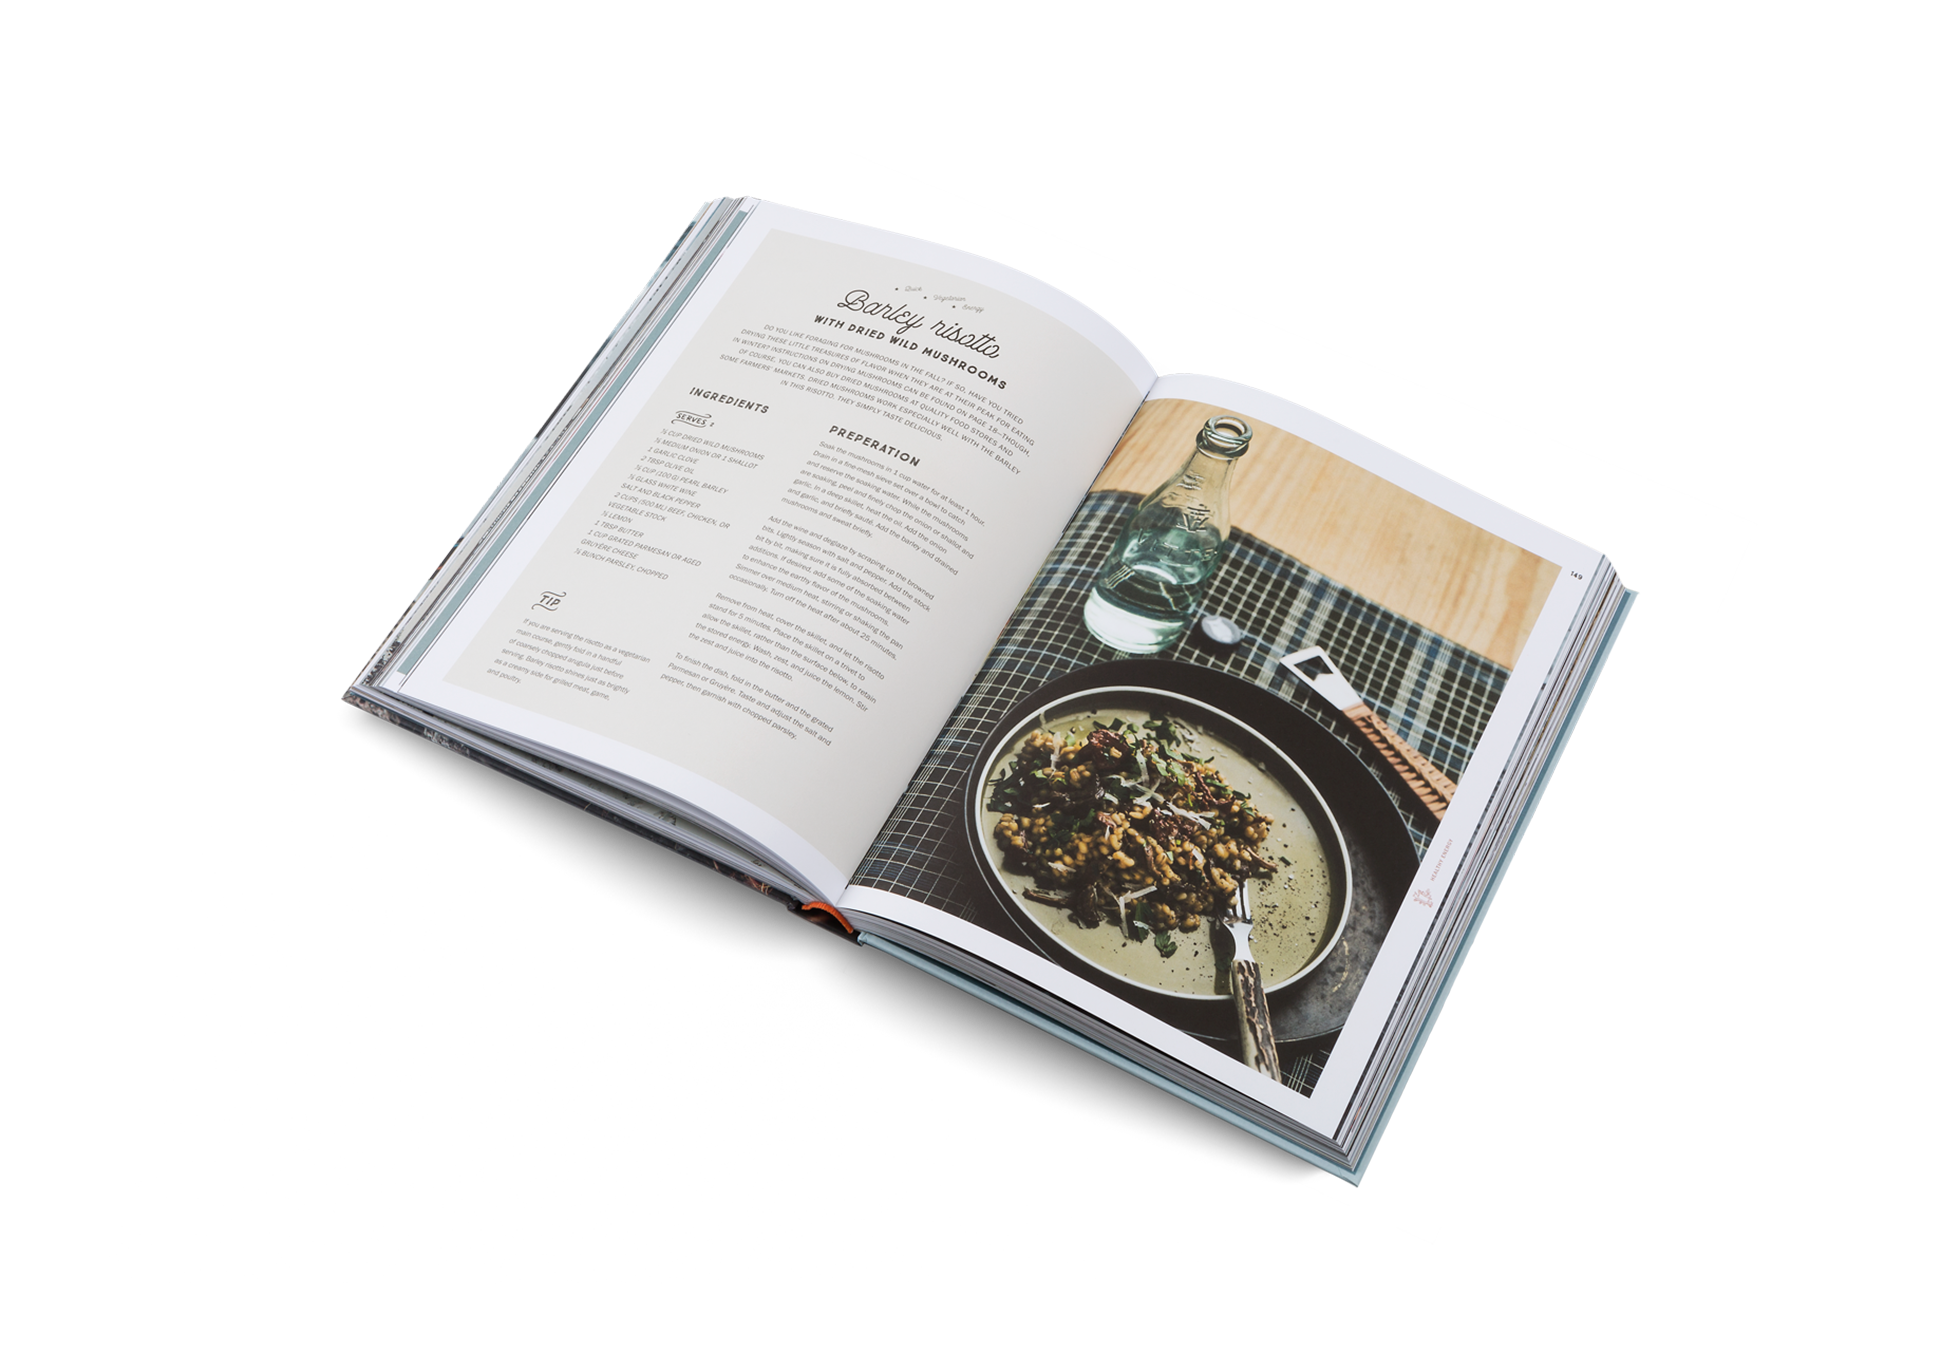 Delicious Wintertime - The Cookbook for Cold Weather Adventures